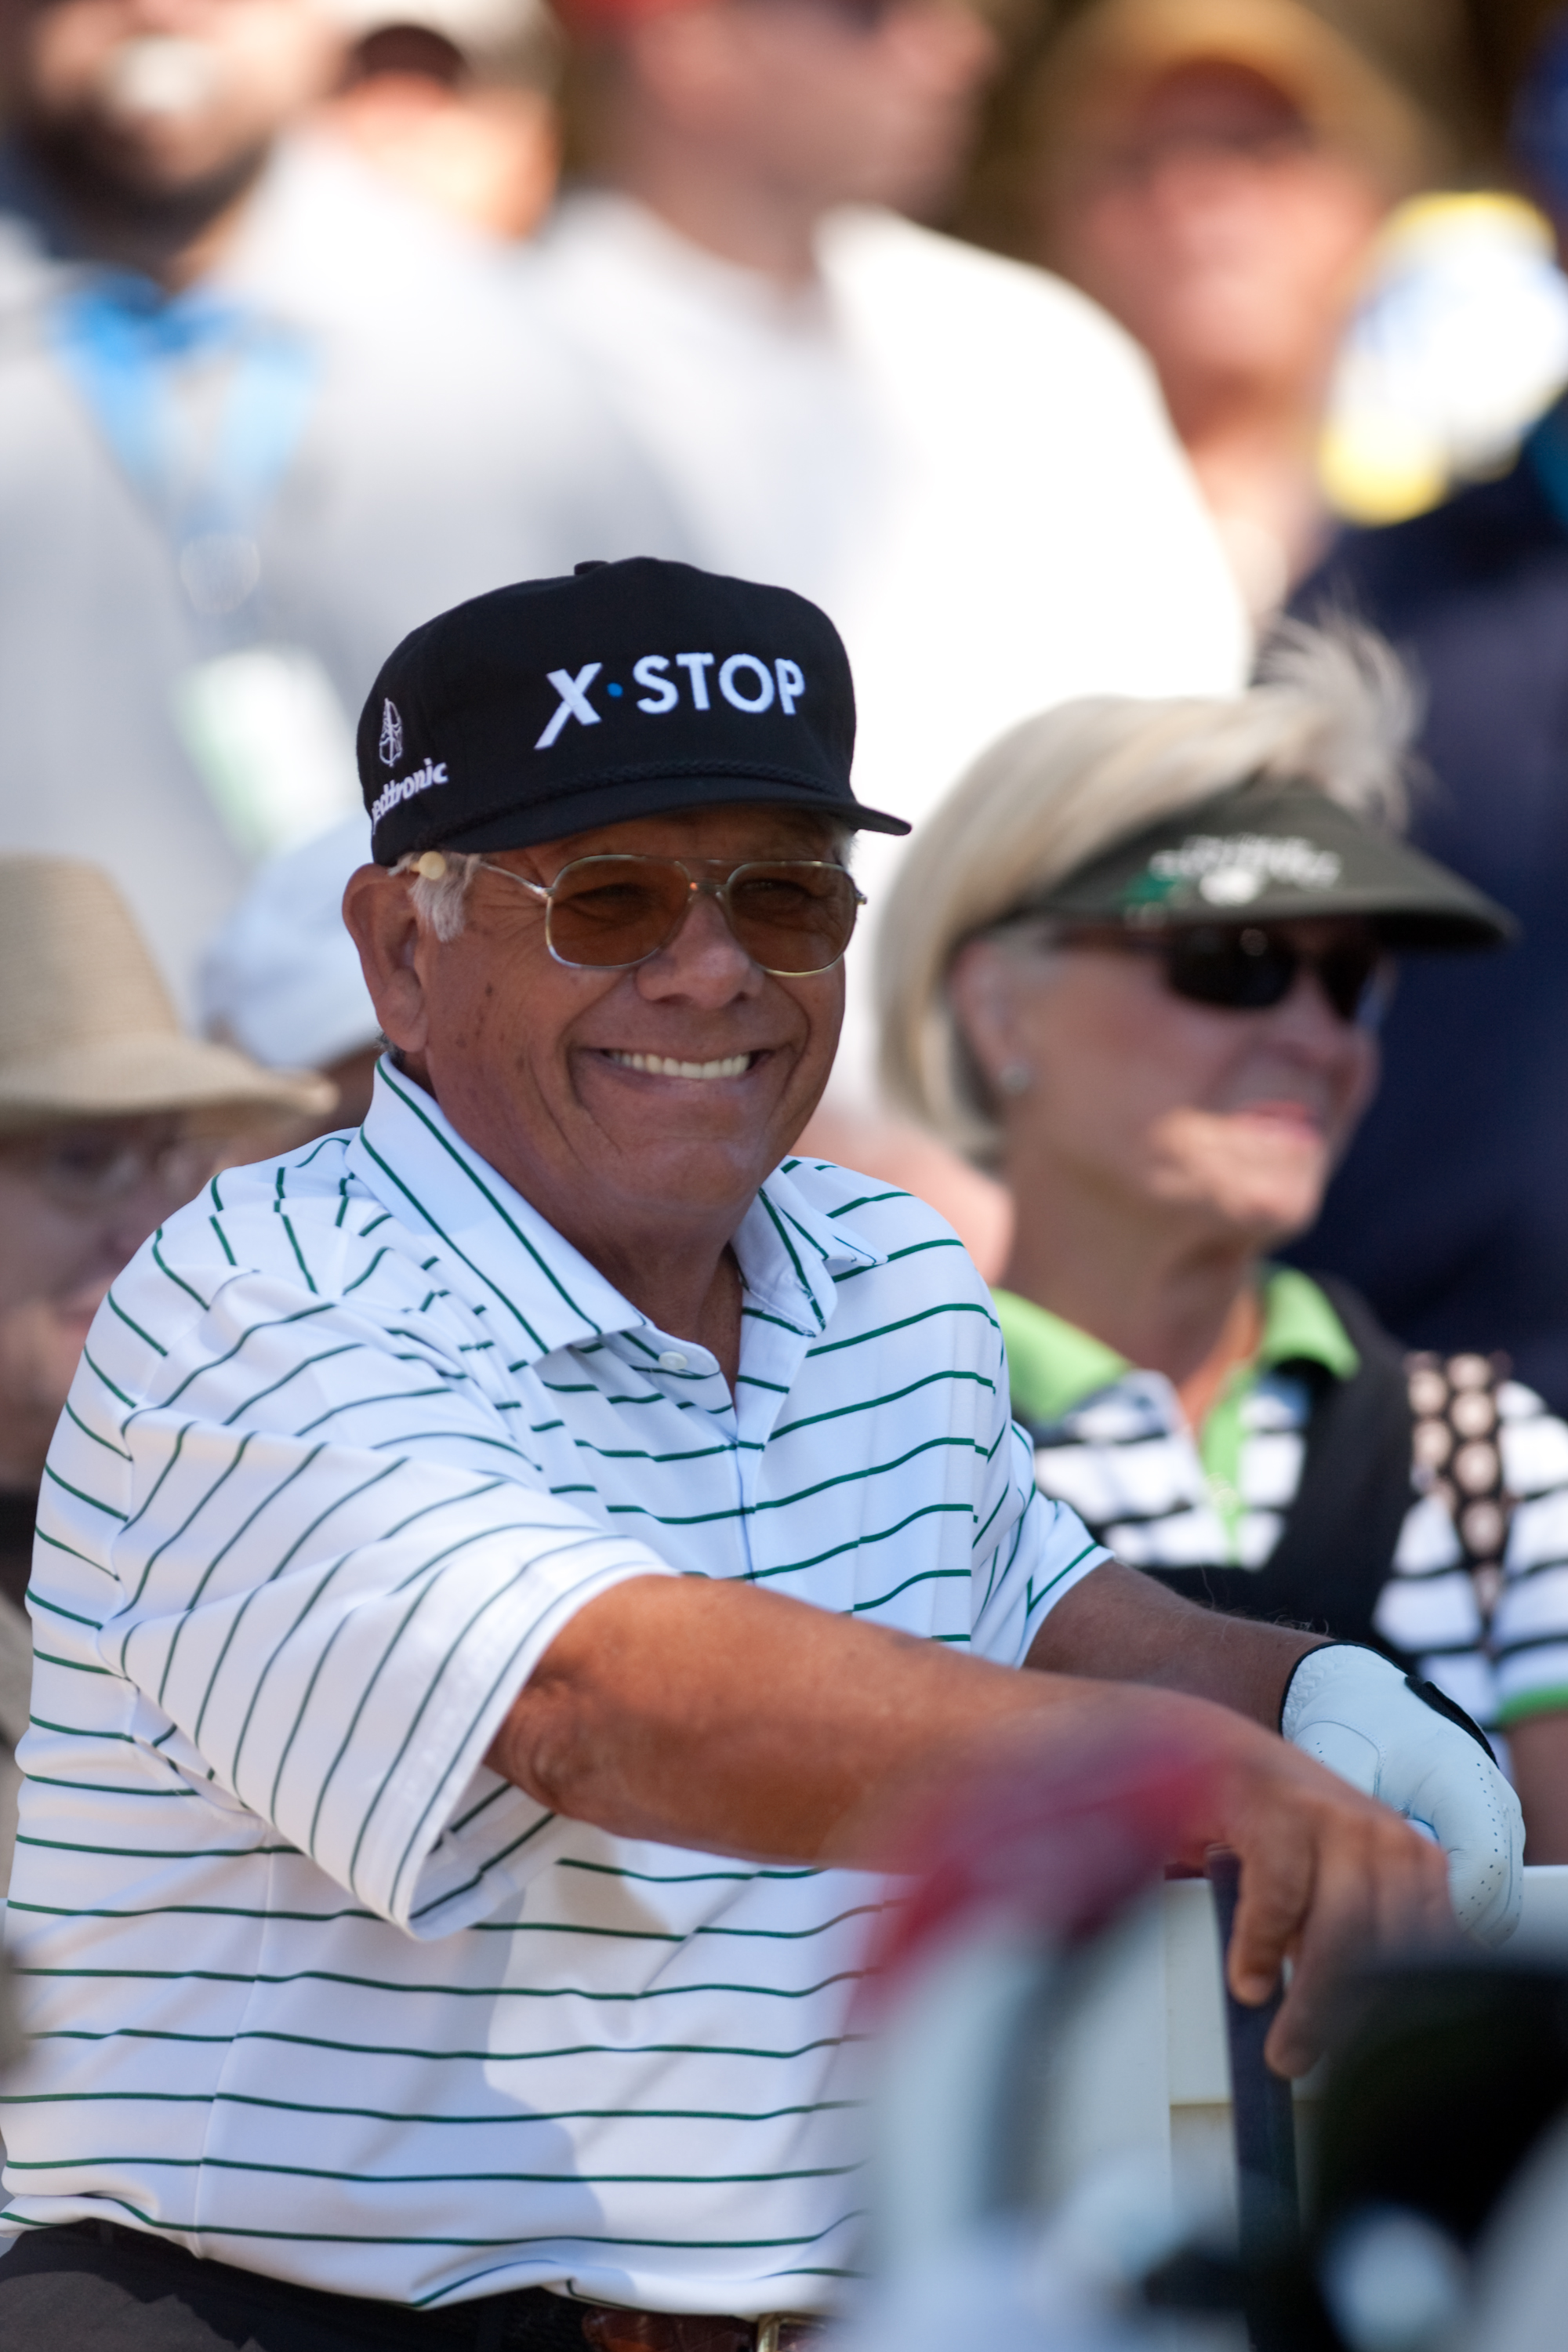 SAN ANTONIO, TX - OCTOBER 30:  Lee Trevino waits on the tee during the second round of the AT&T Championship at Oak Hills Country Club on October 30, 2010 in San Antonio, Texas. (Photo by Darren Carroll/Getty Images)